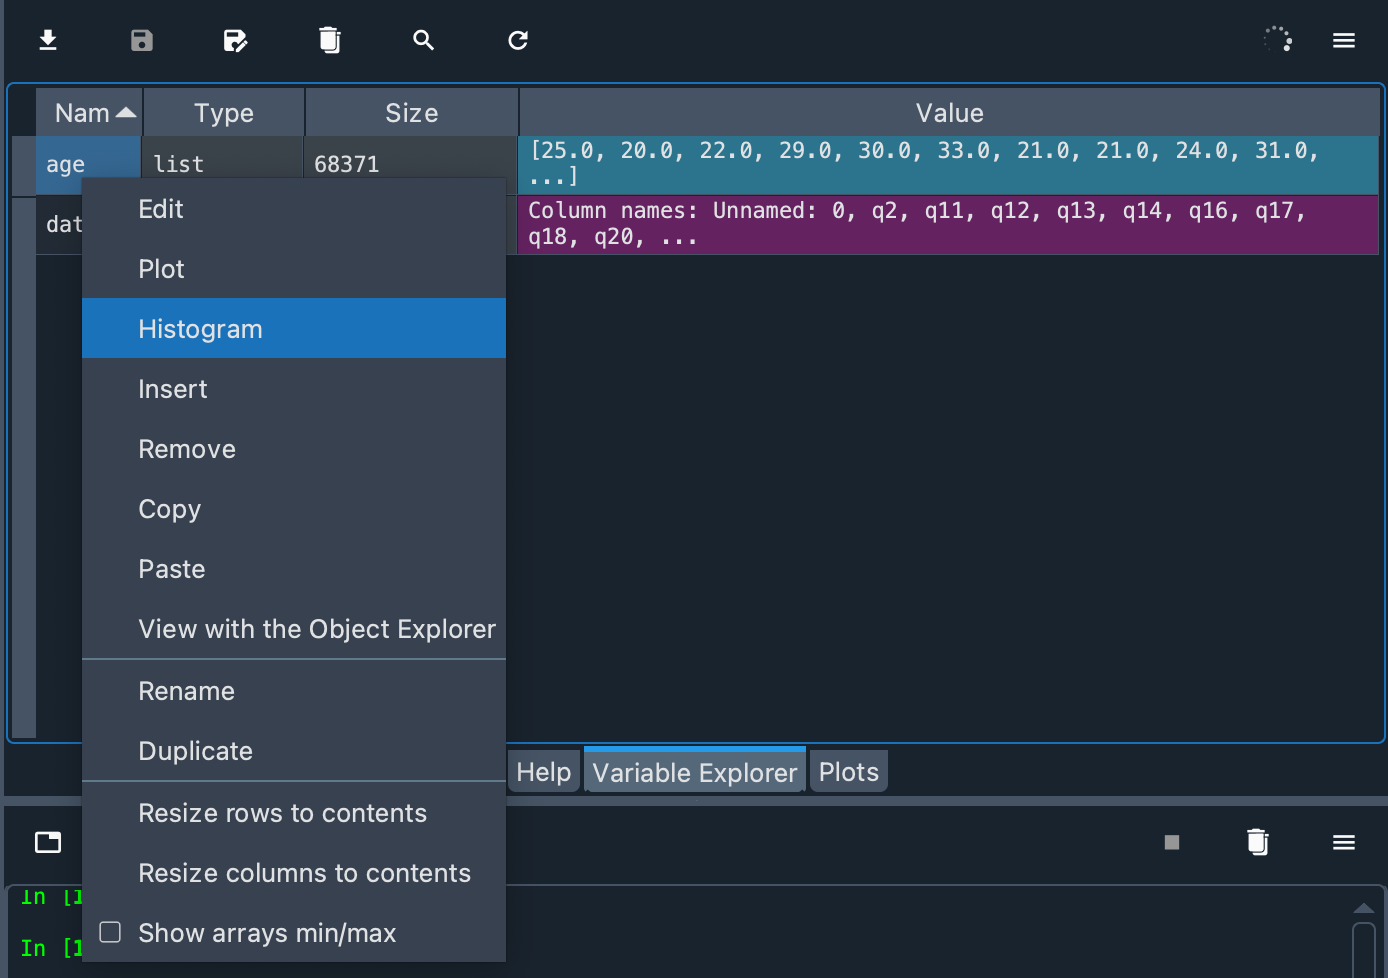 Age histogram option from Variable Explorer